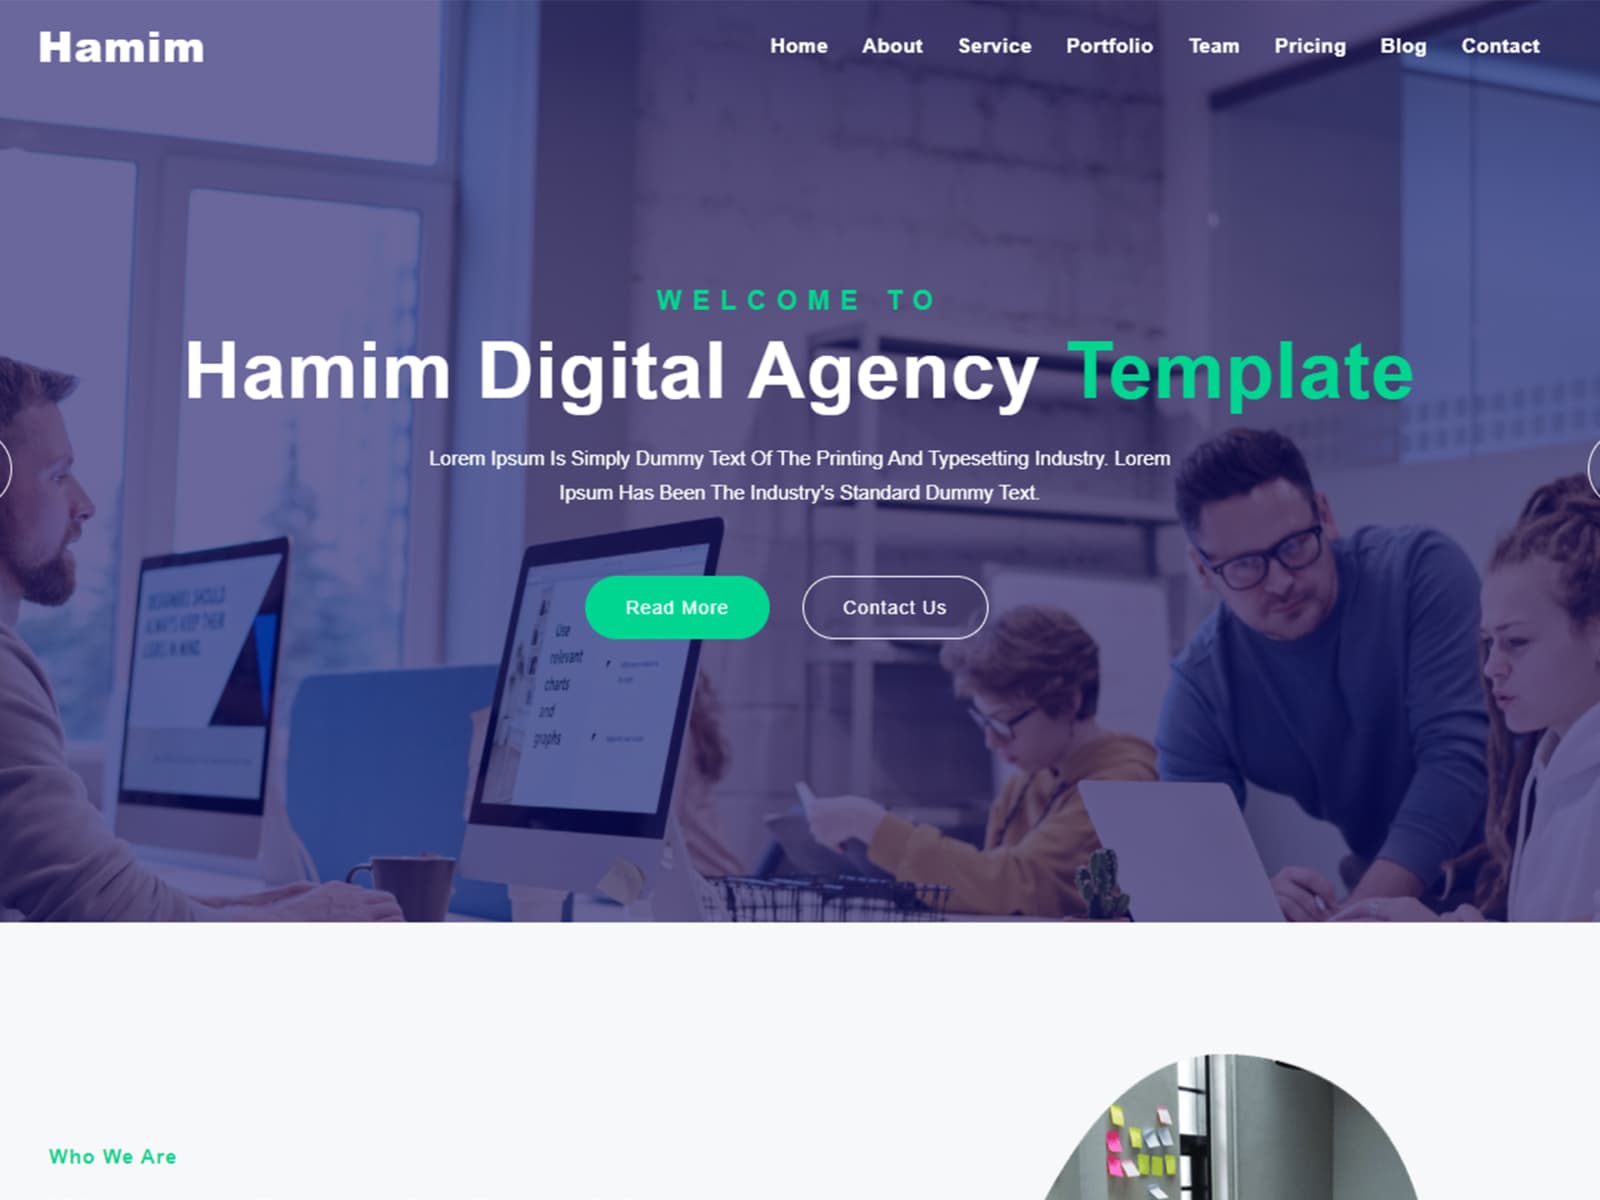 hamim-digital-agency-one-page-landing-page-template-2180